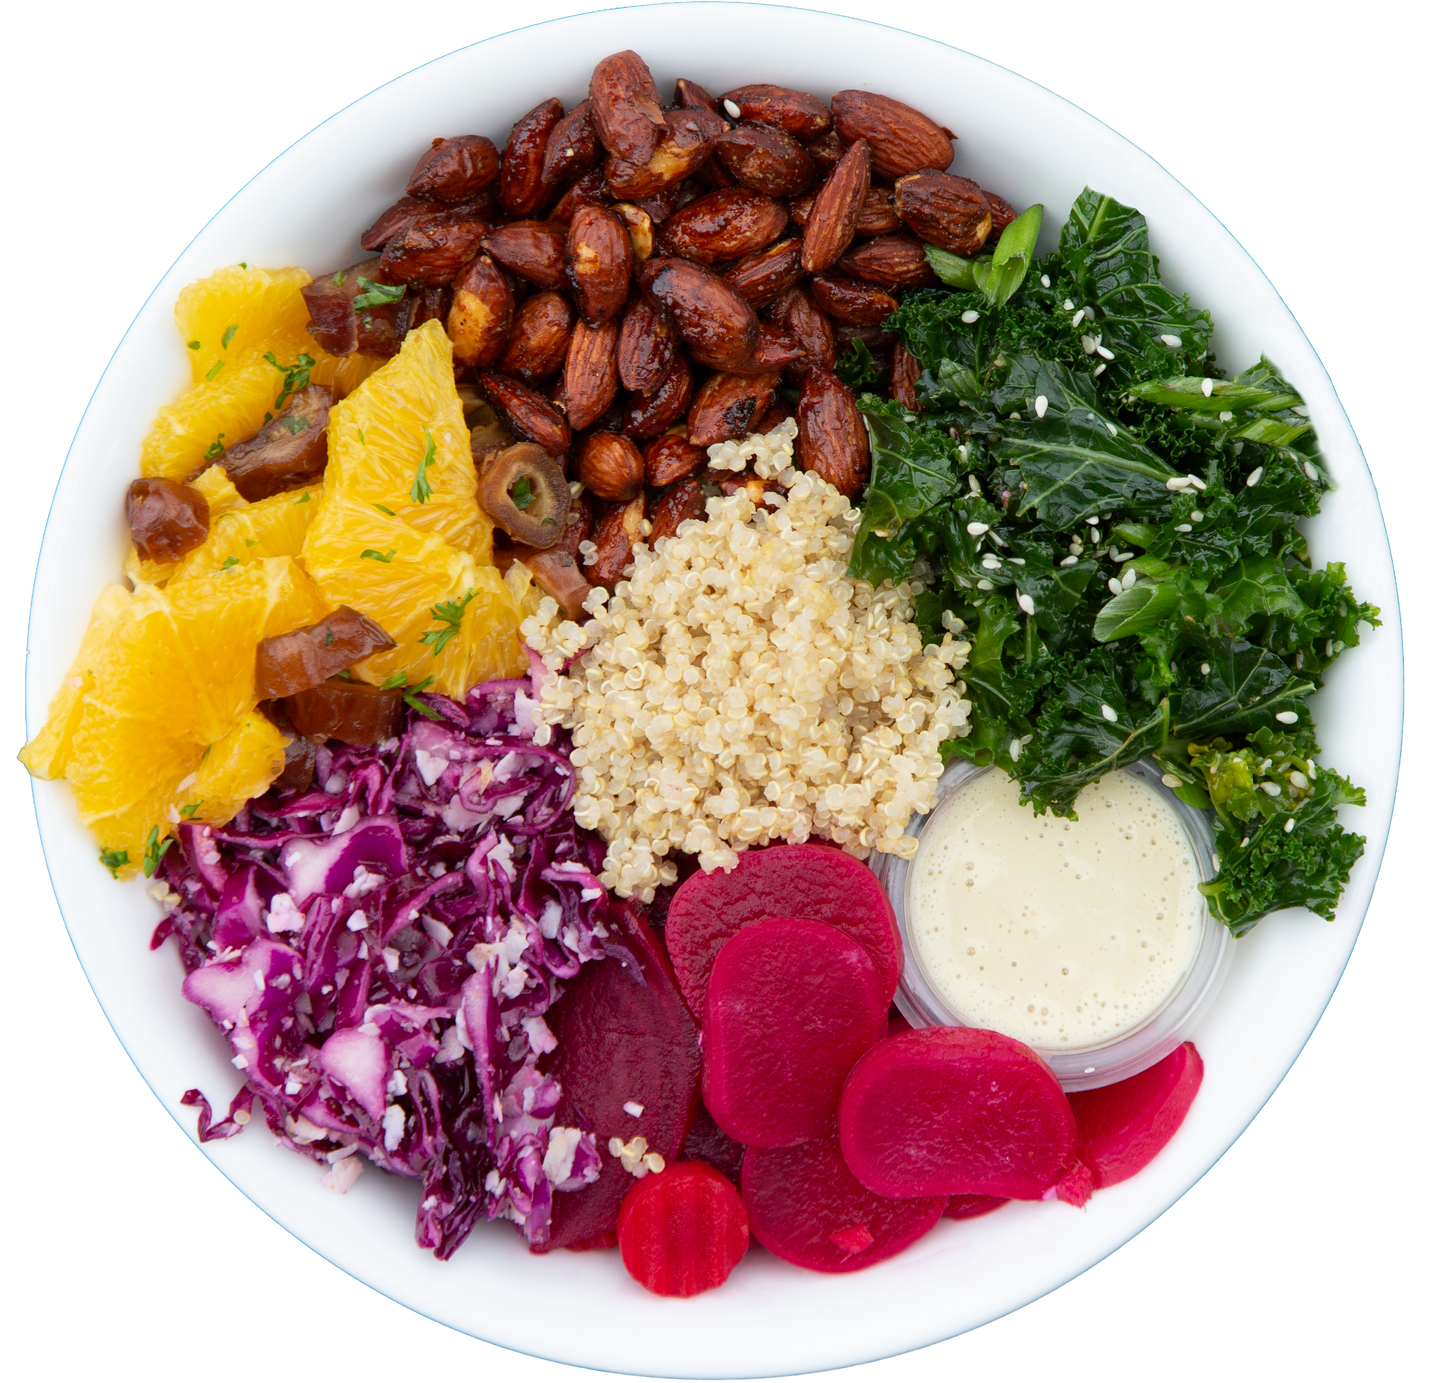 Plant-based vegan vegetarian Sweet and Spicy Bowl in Des Moines, Iowa